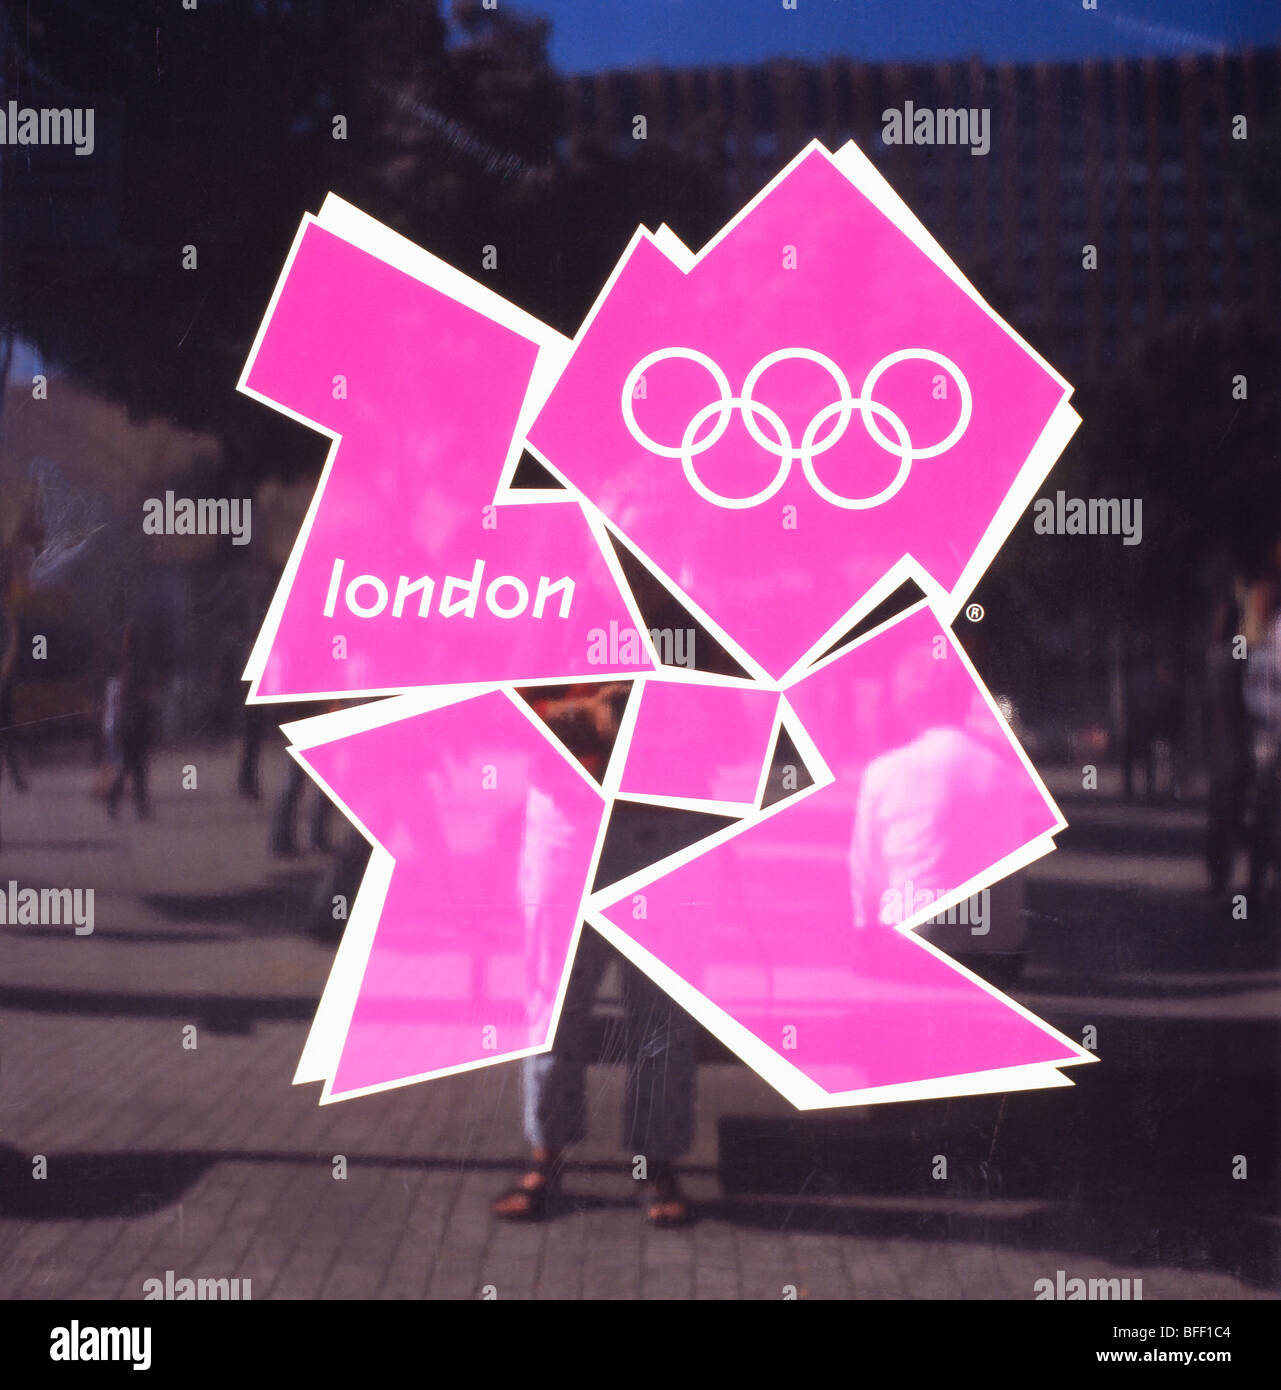 The 2012 Olympic logo with reflections of people on the concourse at Stratford Station, East London, England UK  KATHY DEWITT Stock Photo